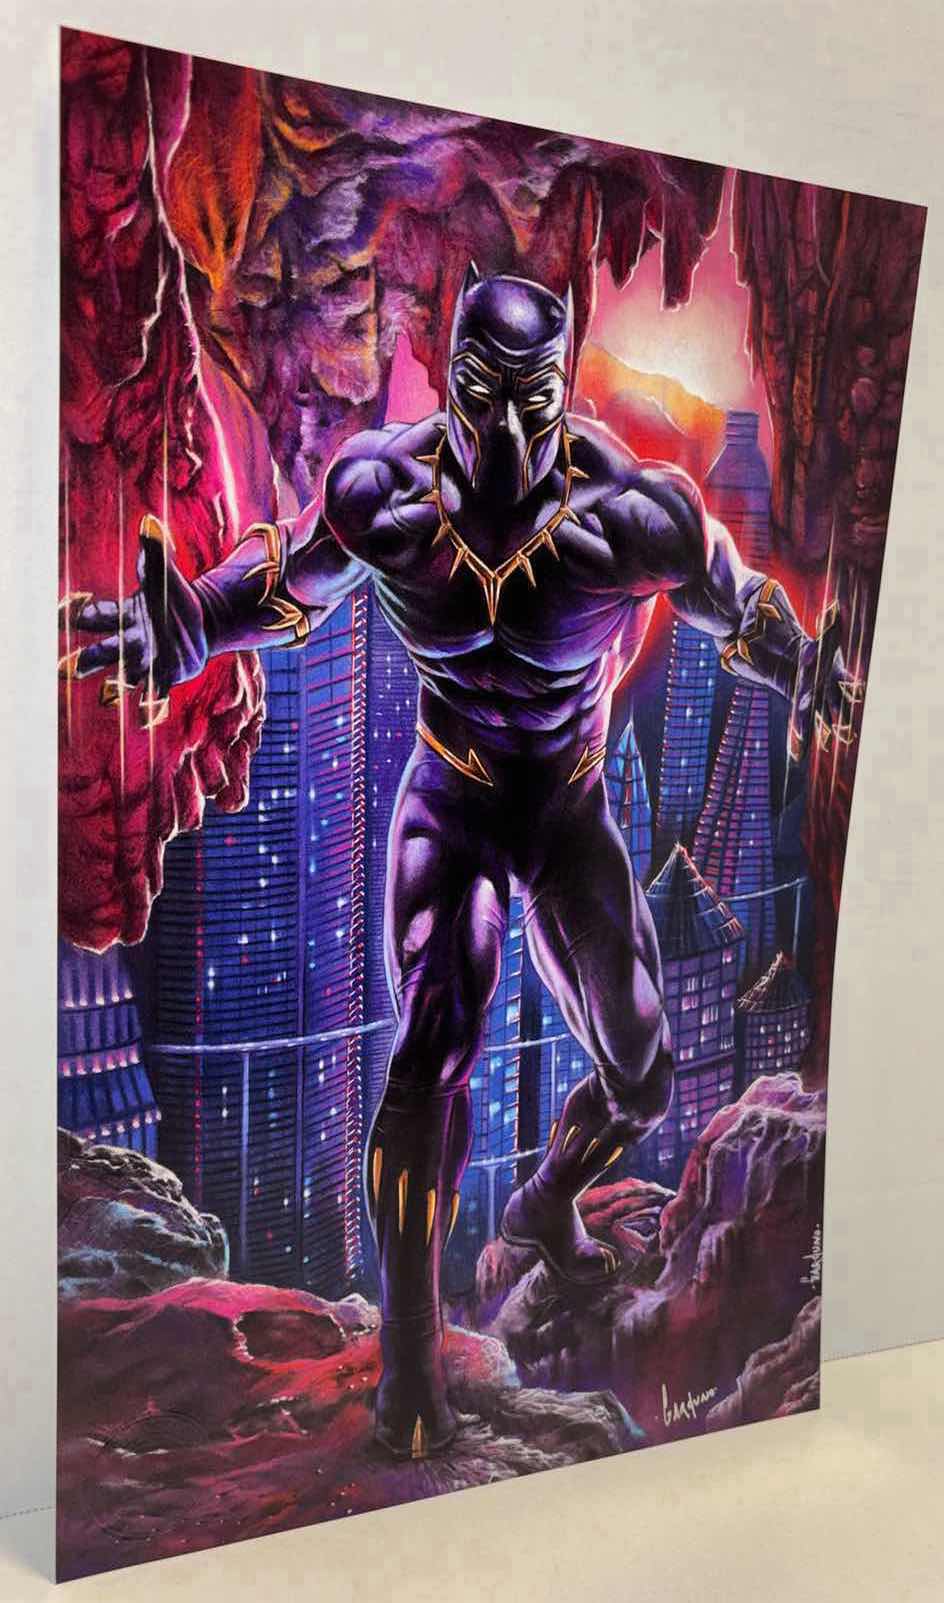 Photo 1 of VICTOR GARDUNO “CLASSIC BLACK PANTHER” 11” X 17” INFINITY GLOSS UNFRAMED PRINT W EMBOSSED SEAL, DIGITAL SIGNATURE & OFFICIAL SIGNATURE W COA INCLUDED, STORED IN A RIGID PRINT PROTECTOR SLEEVE